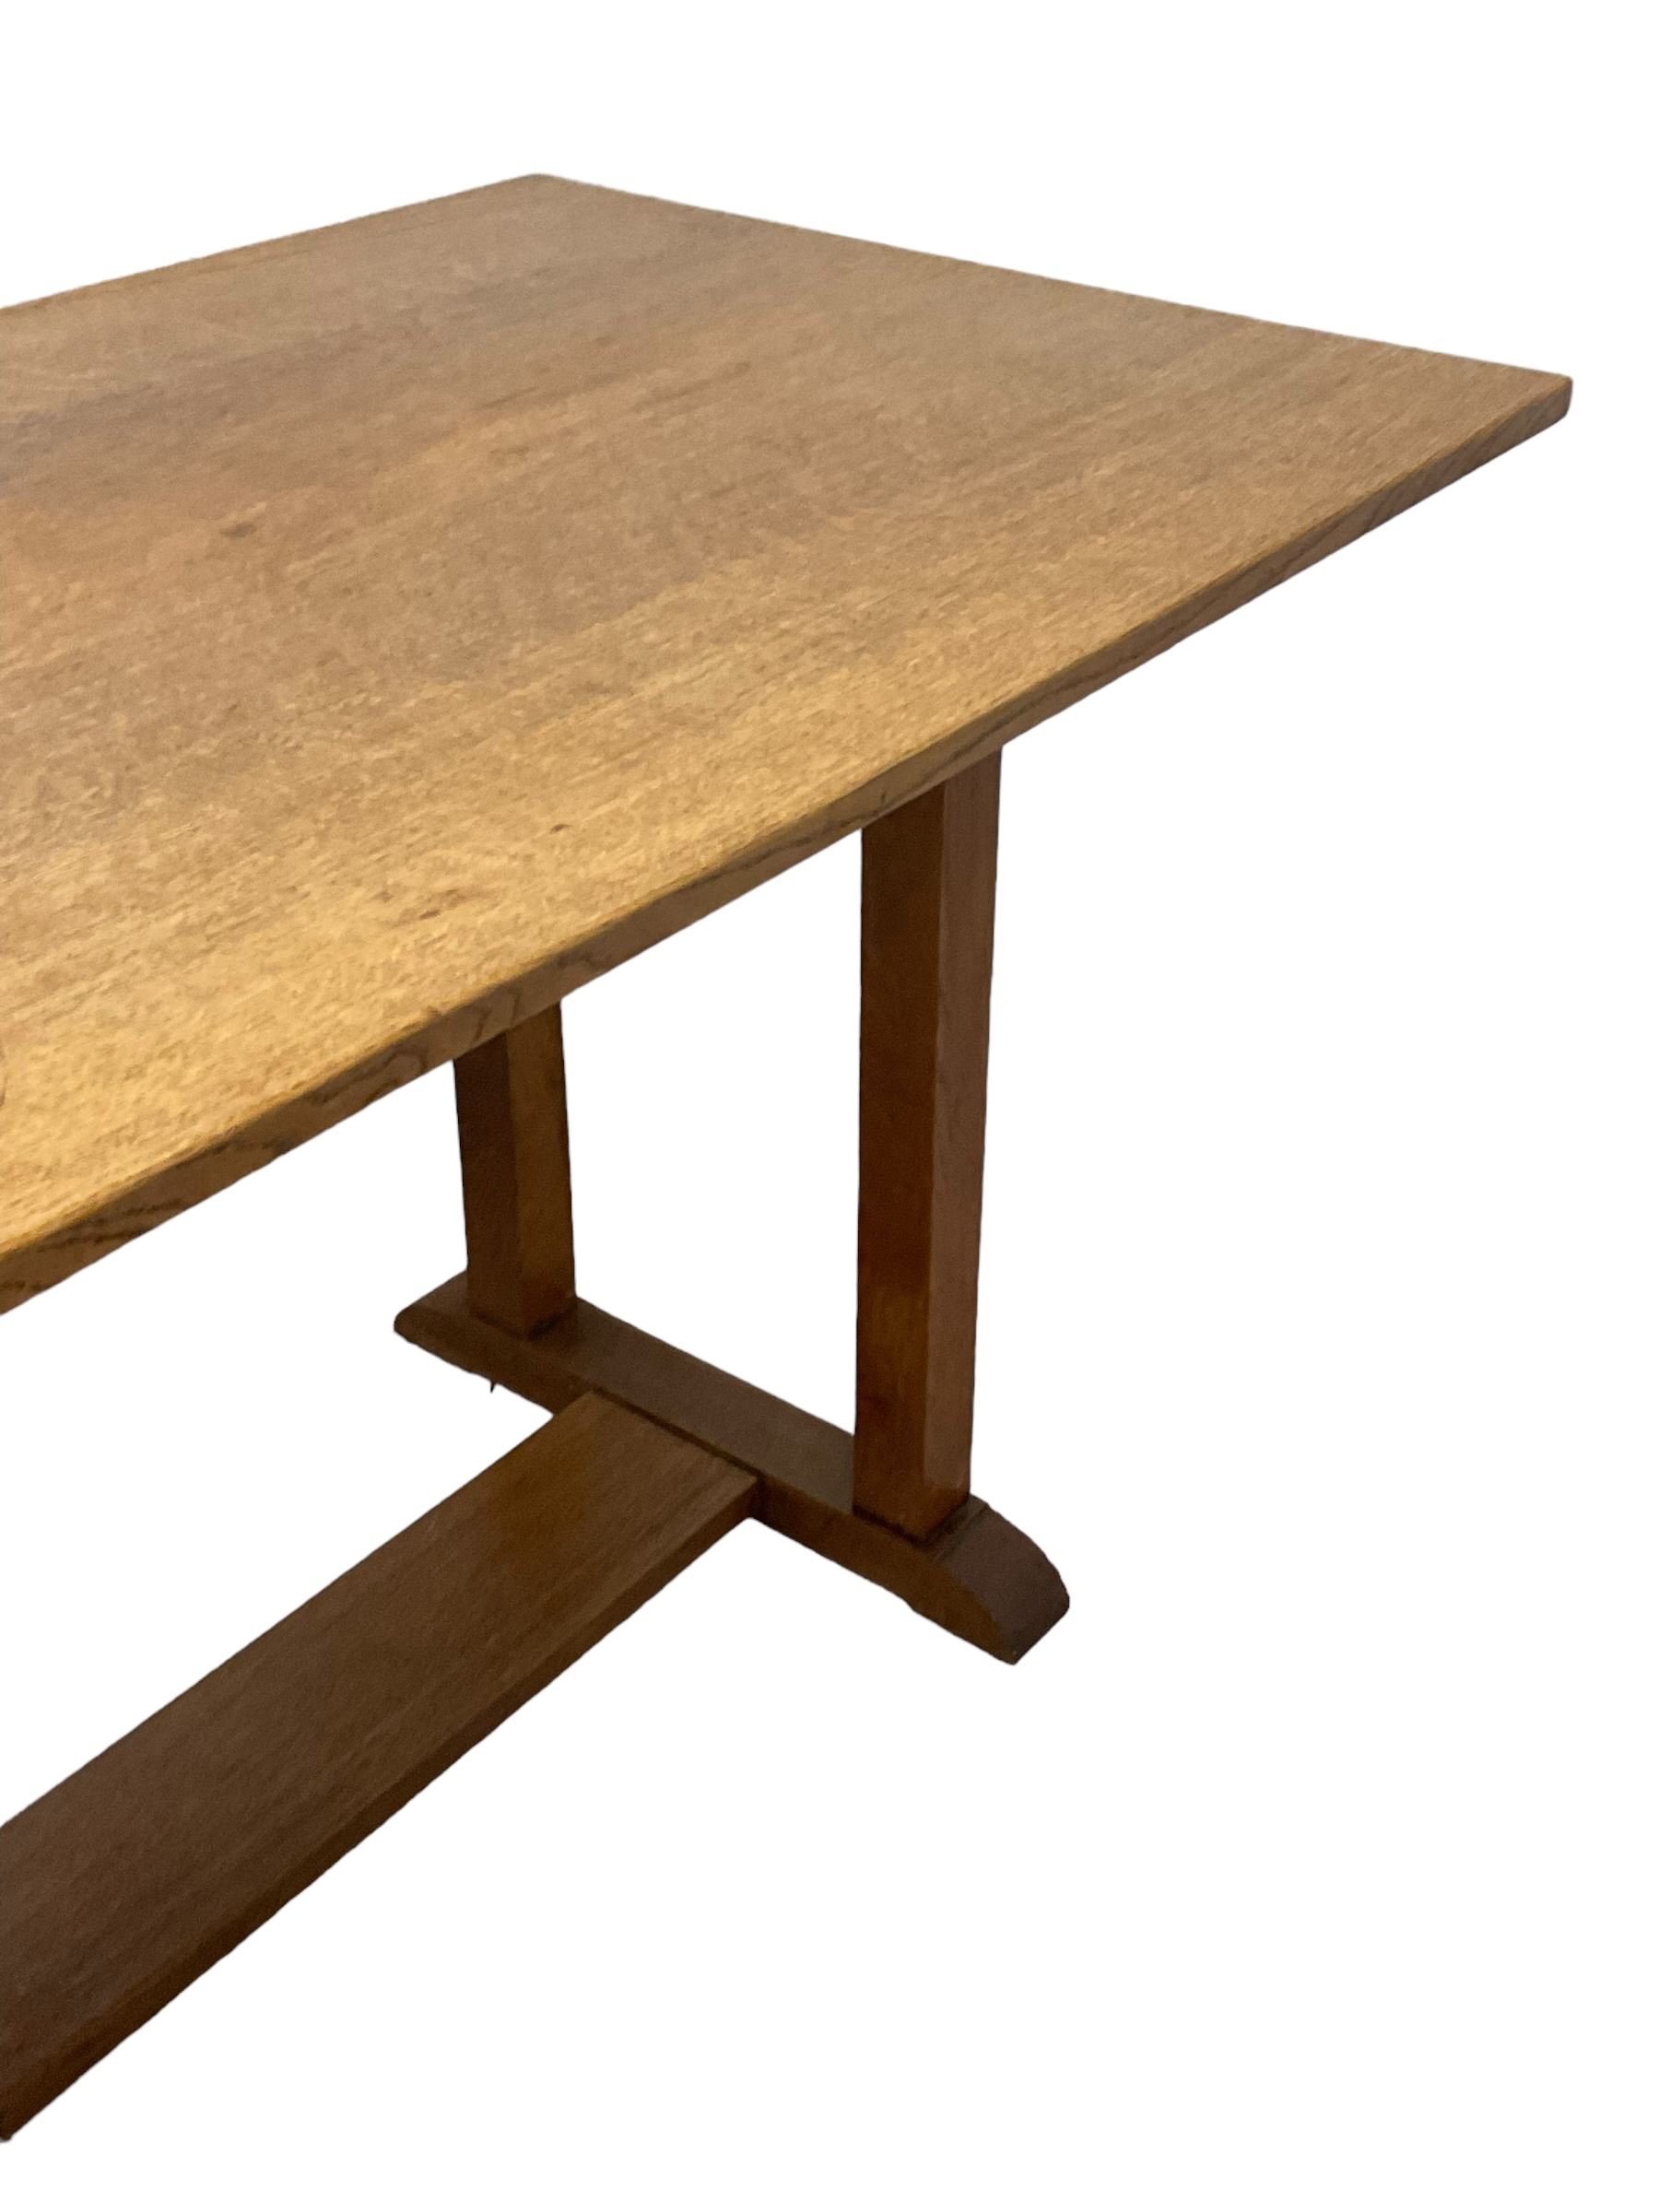 Gordon Russell - circa. 1930s oak refectory dining table - Image 7 of 9